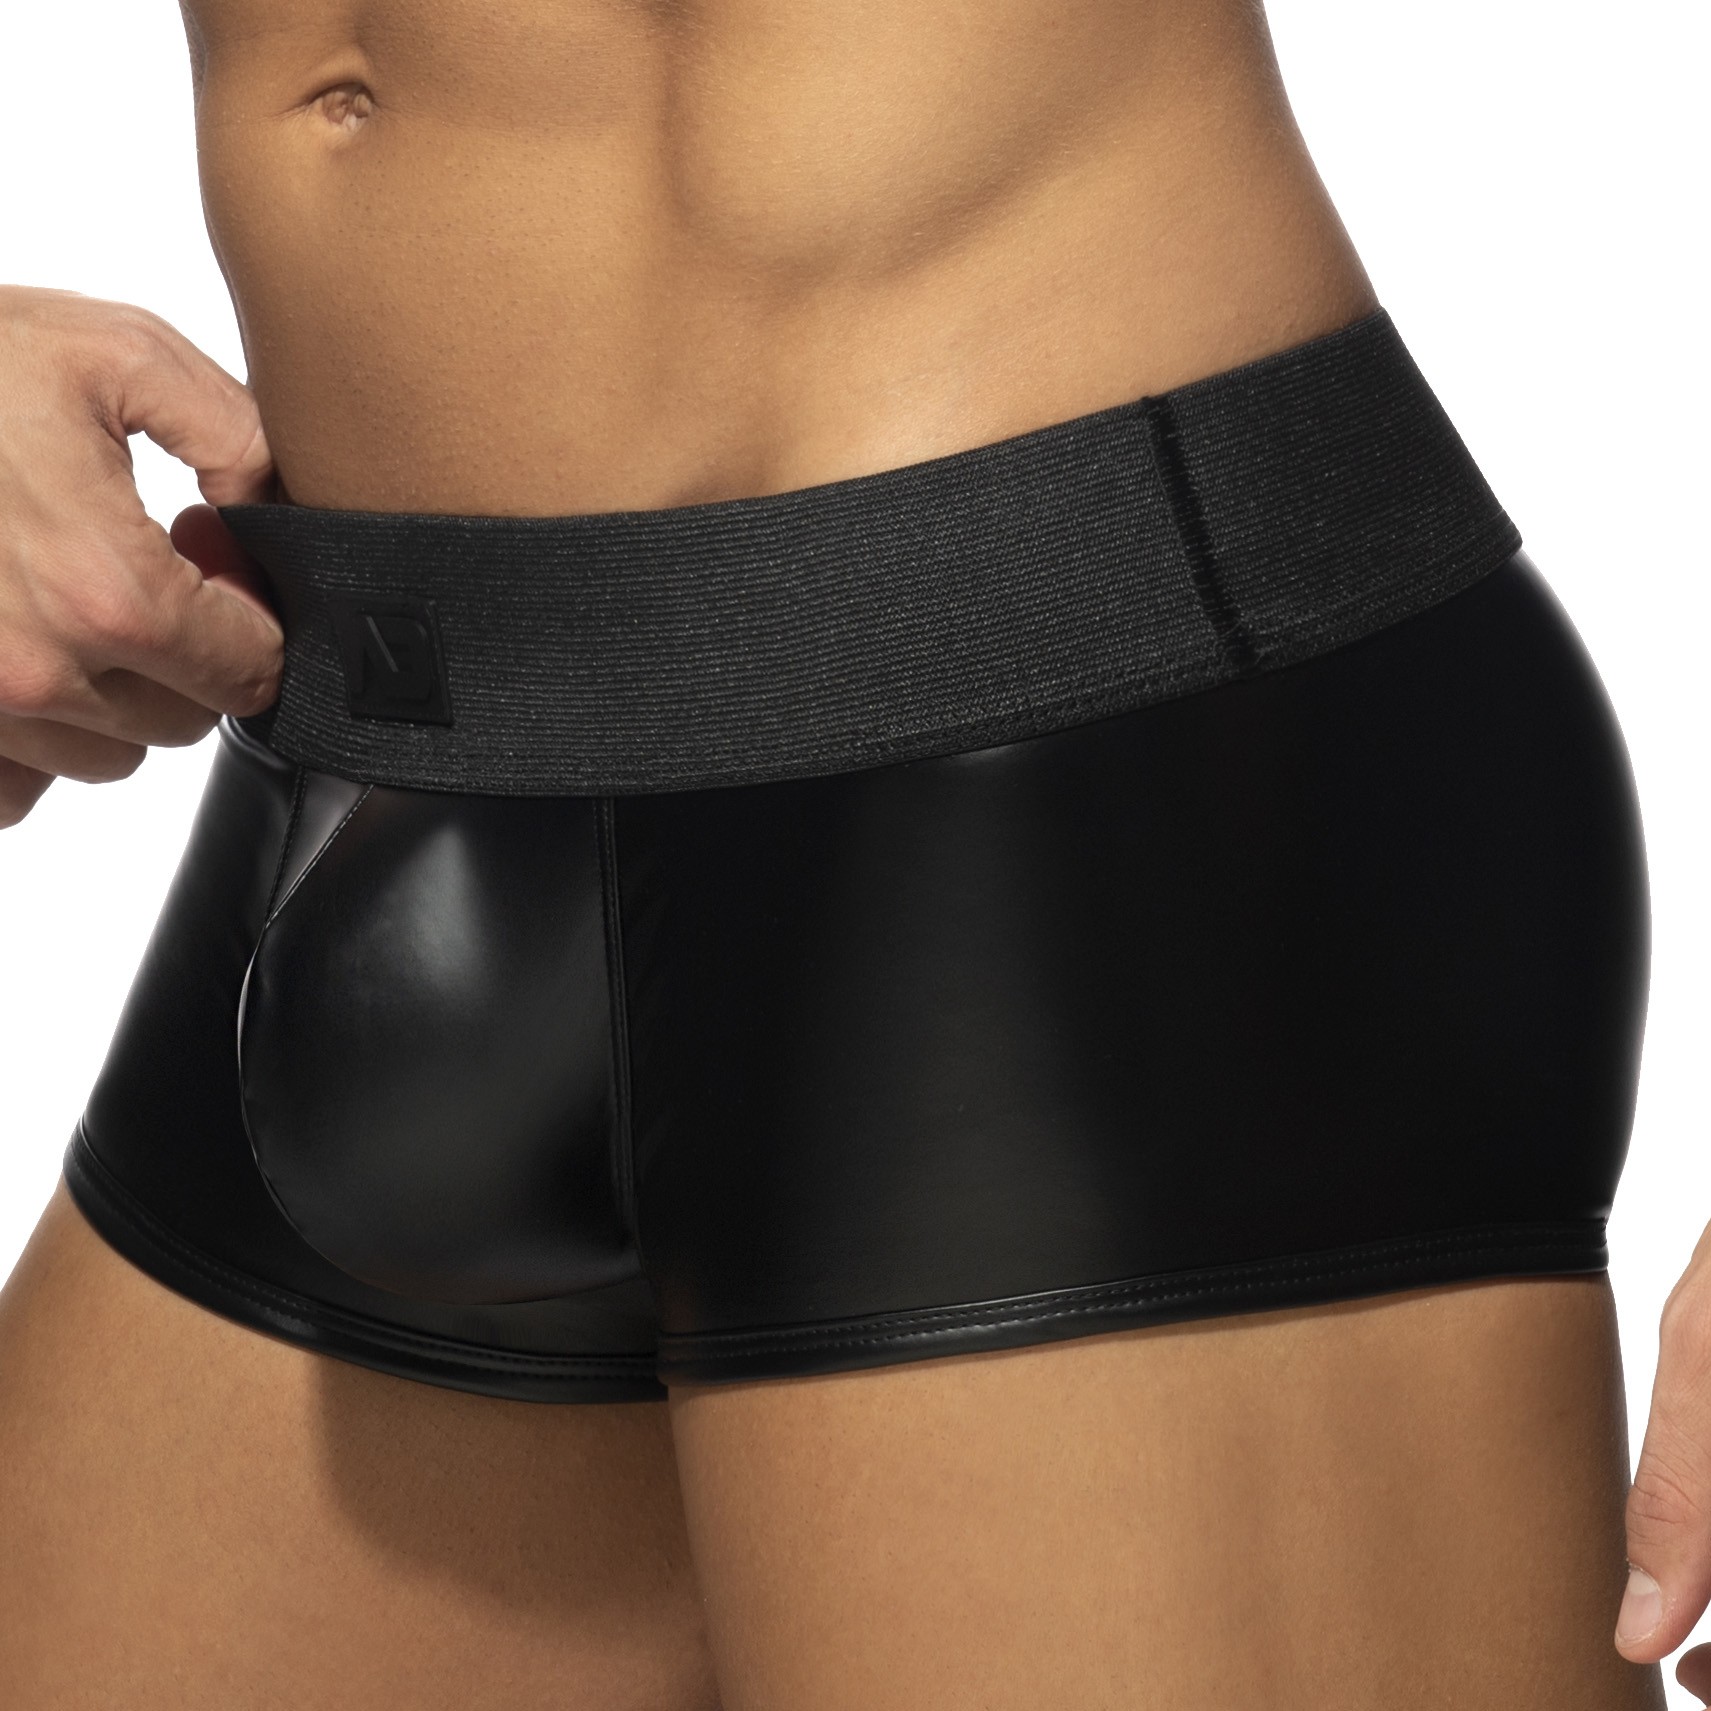 Trunk back zip: Boxers for man brand AD Fétish for sale online at l